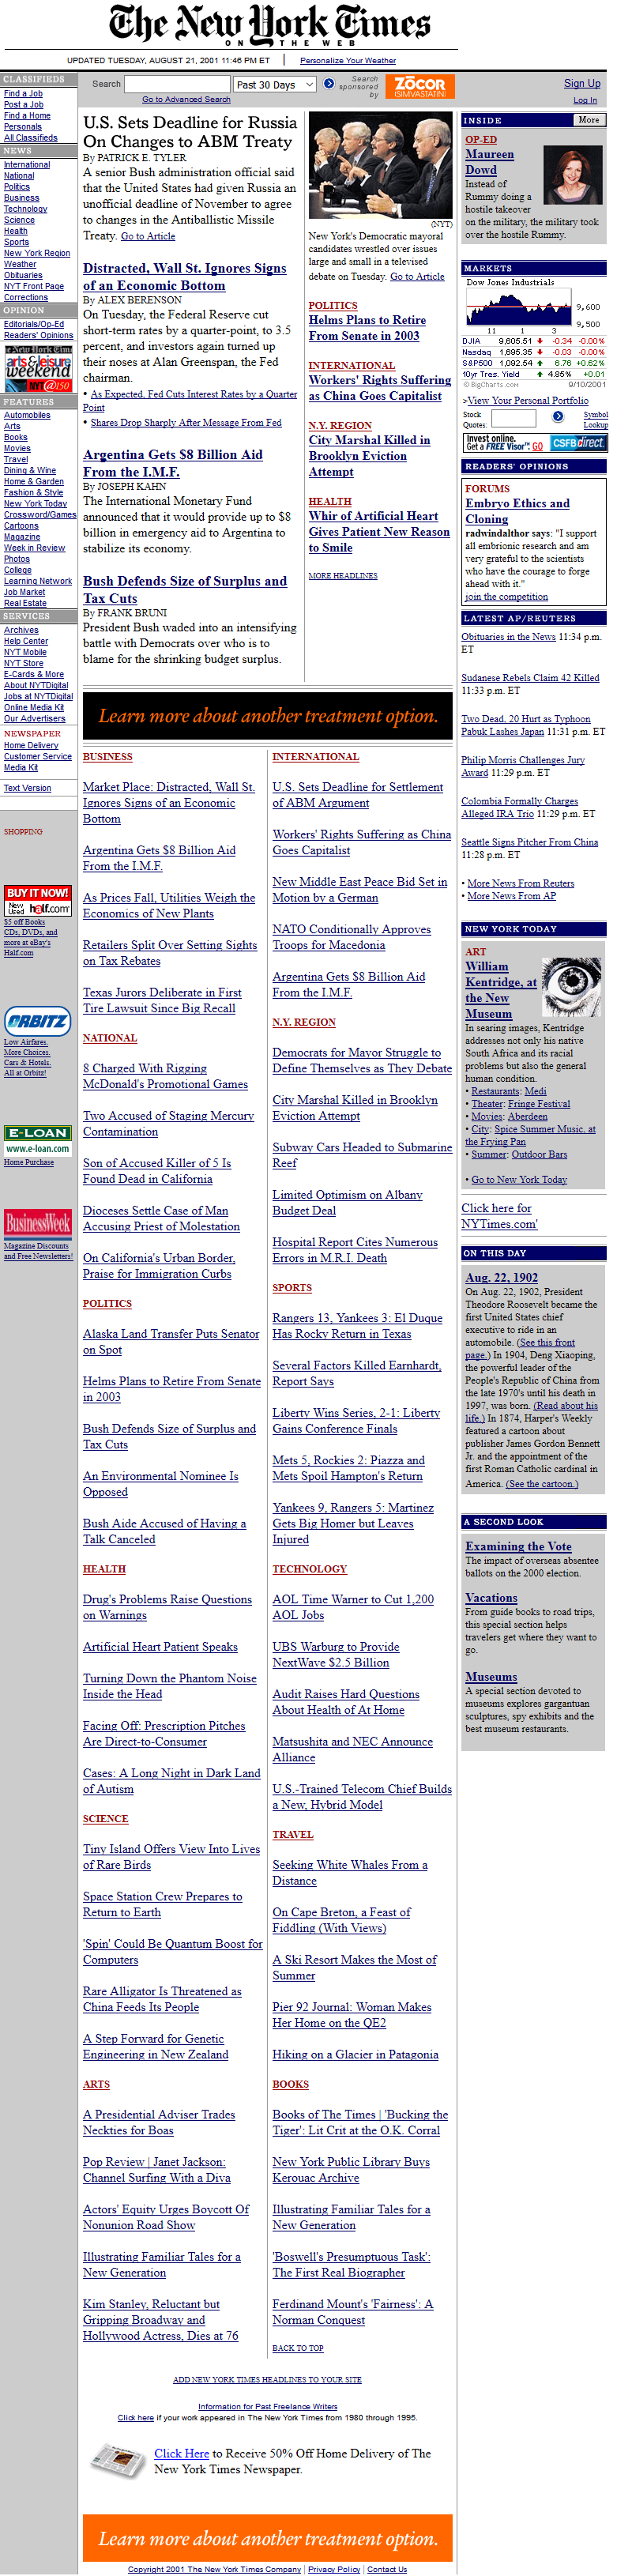 The New York Times website in 2001